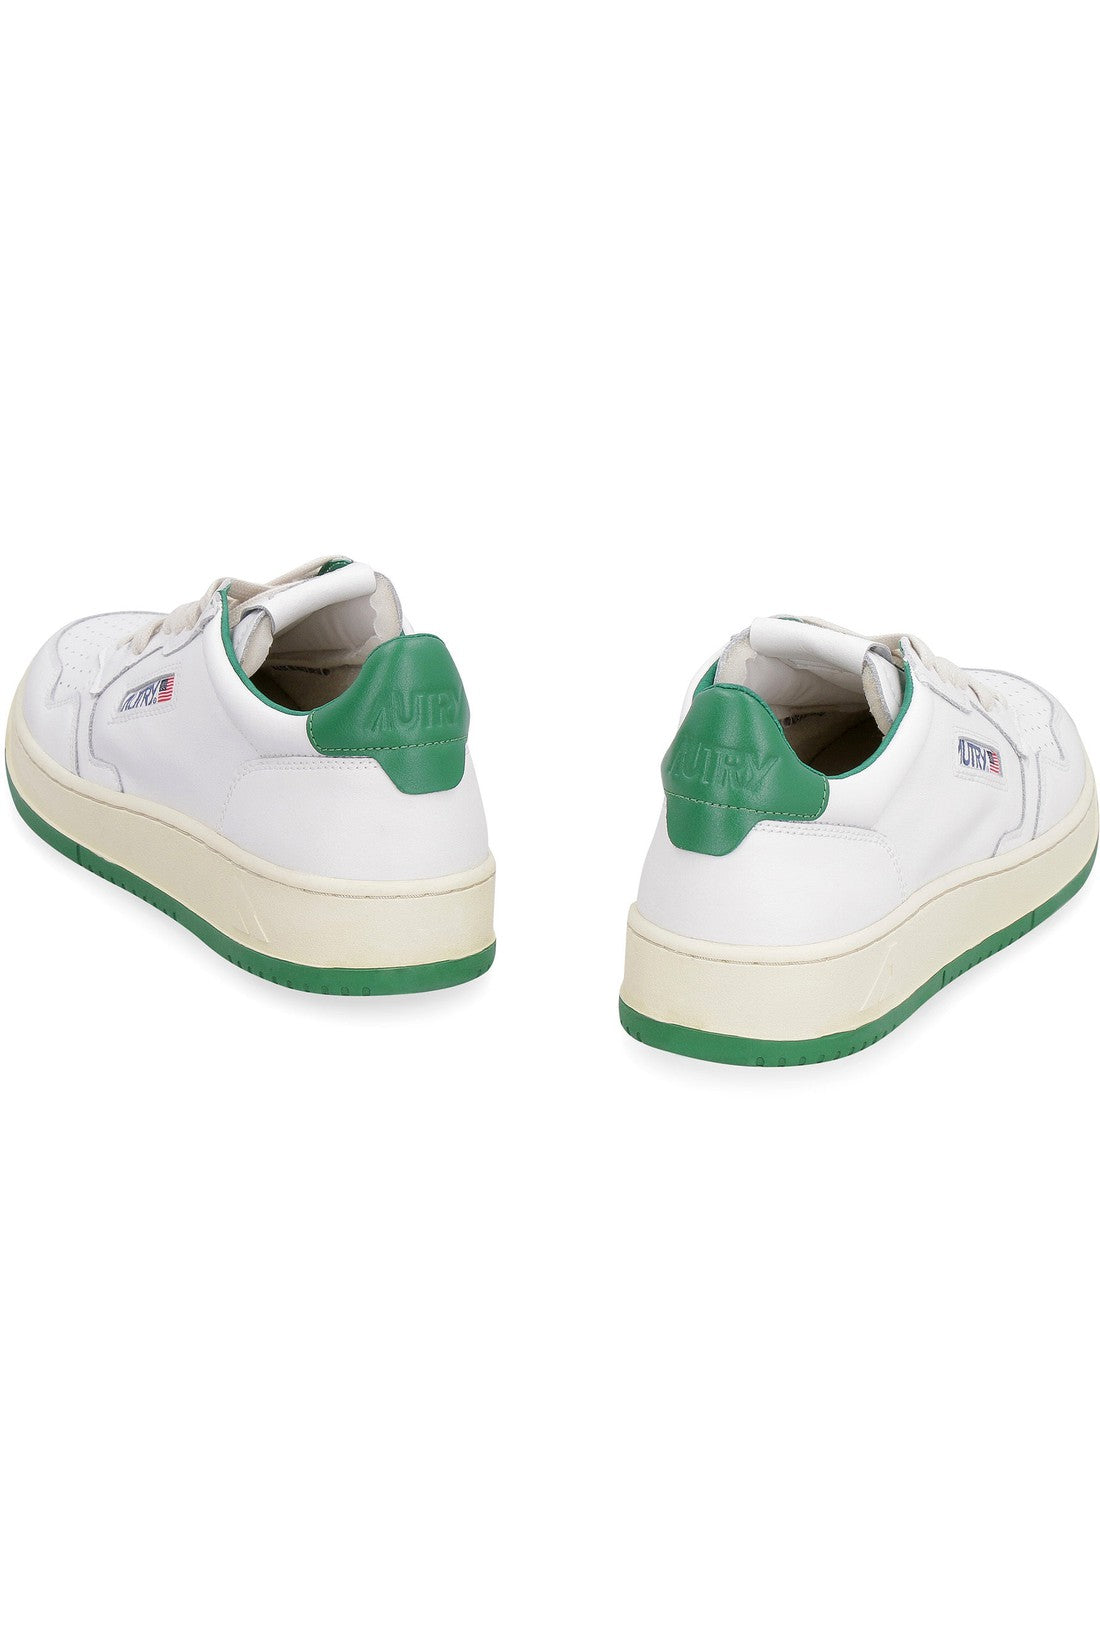 Autry-OUTLET-SALE-Medalist leather low-top sneakers-ARCHIVIST